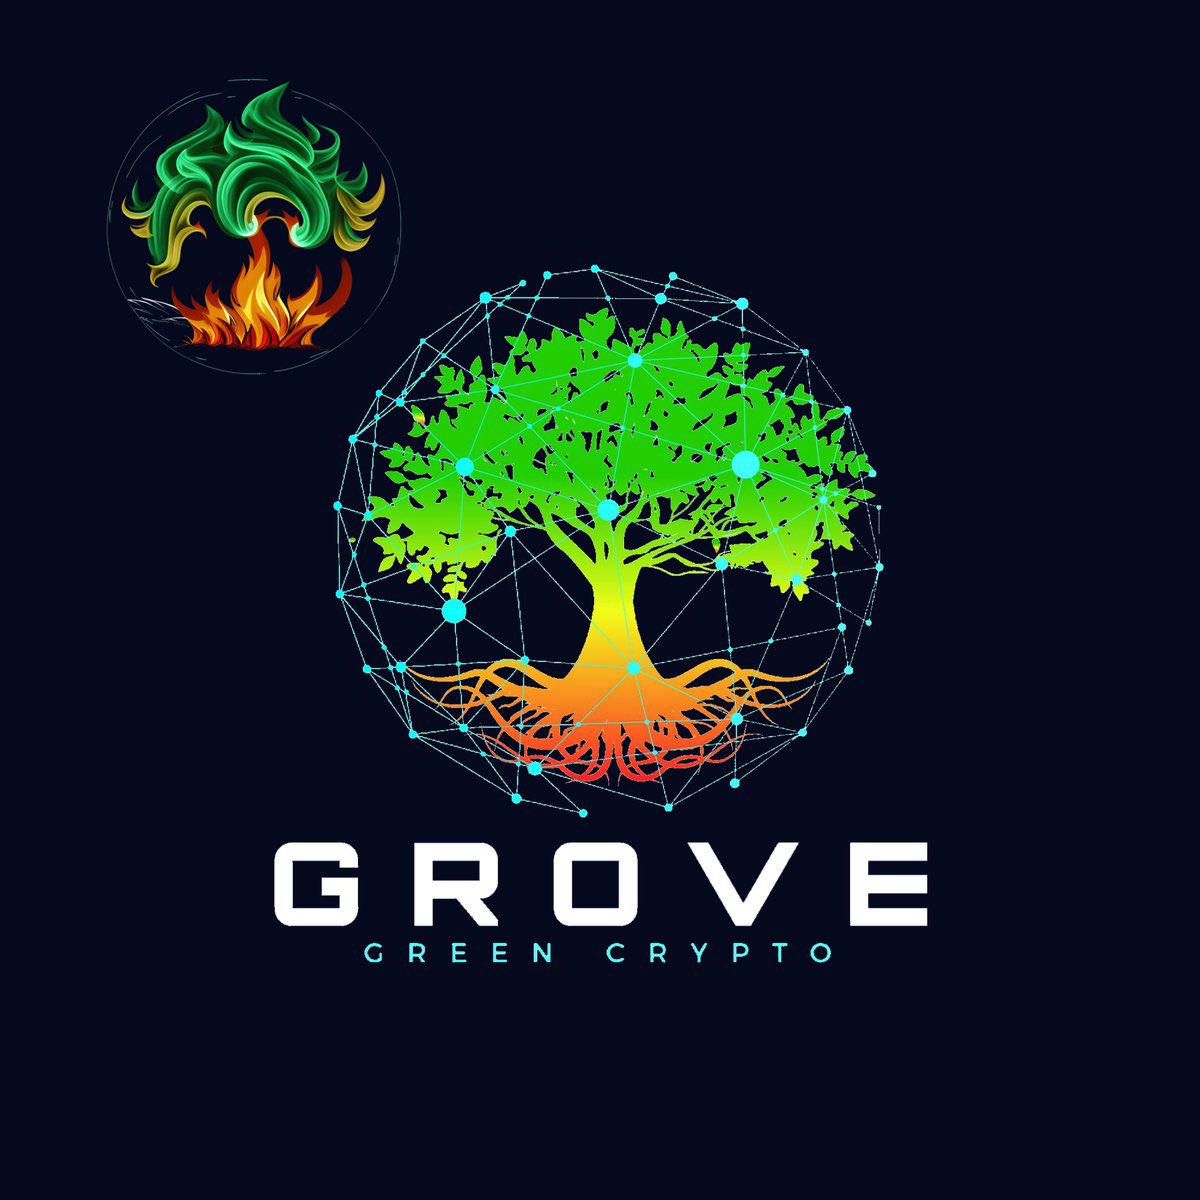 @CryptoThro #GroveCoin #altcoin will surprise the world this year! @GroveToken